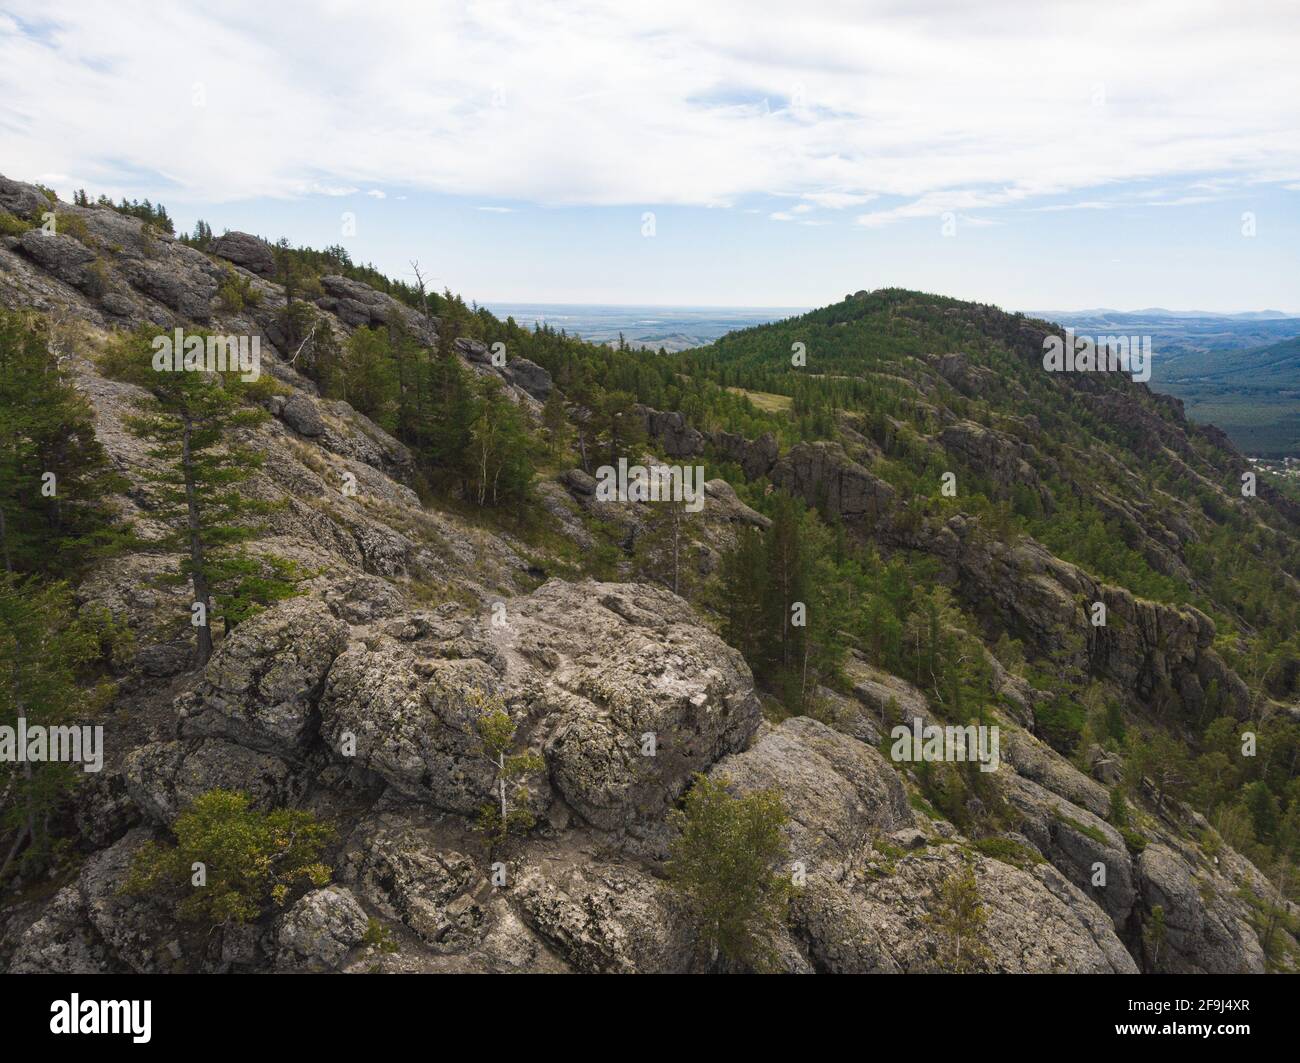 evergreen fir forest on a hilltop among the mountains of the National Park of the Republic of Bashkortostan on Lake Bannoye Stock Photo